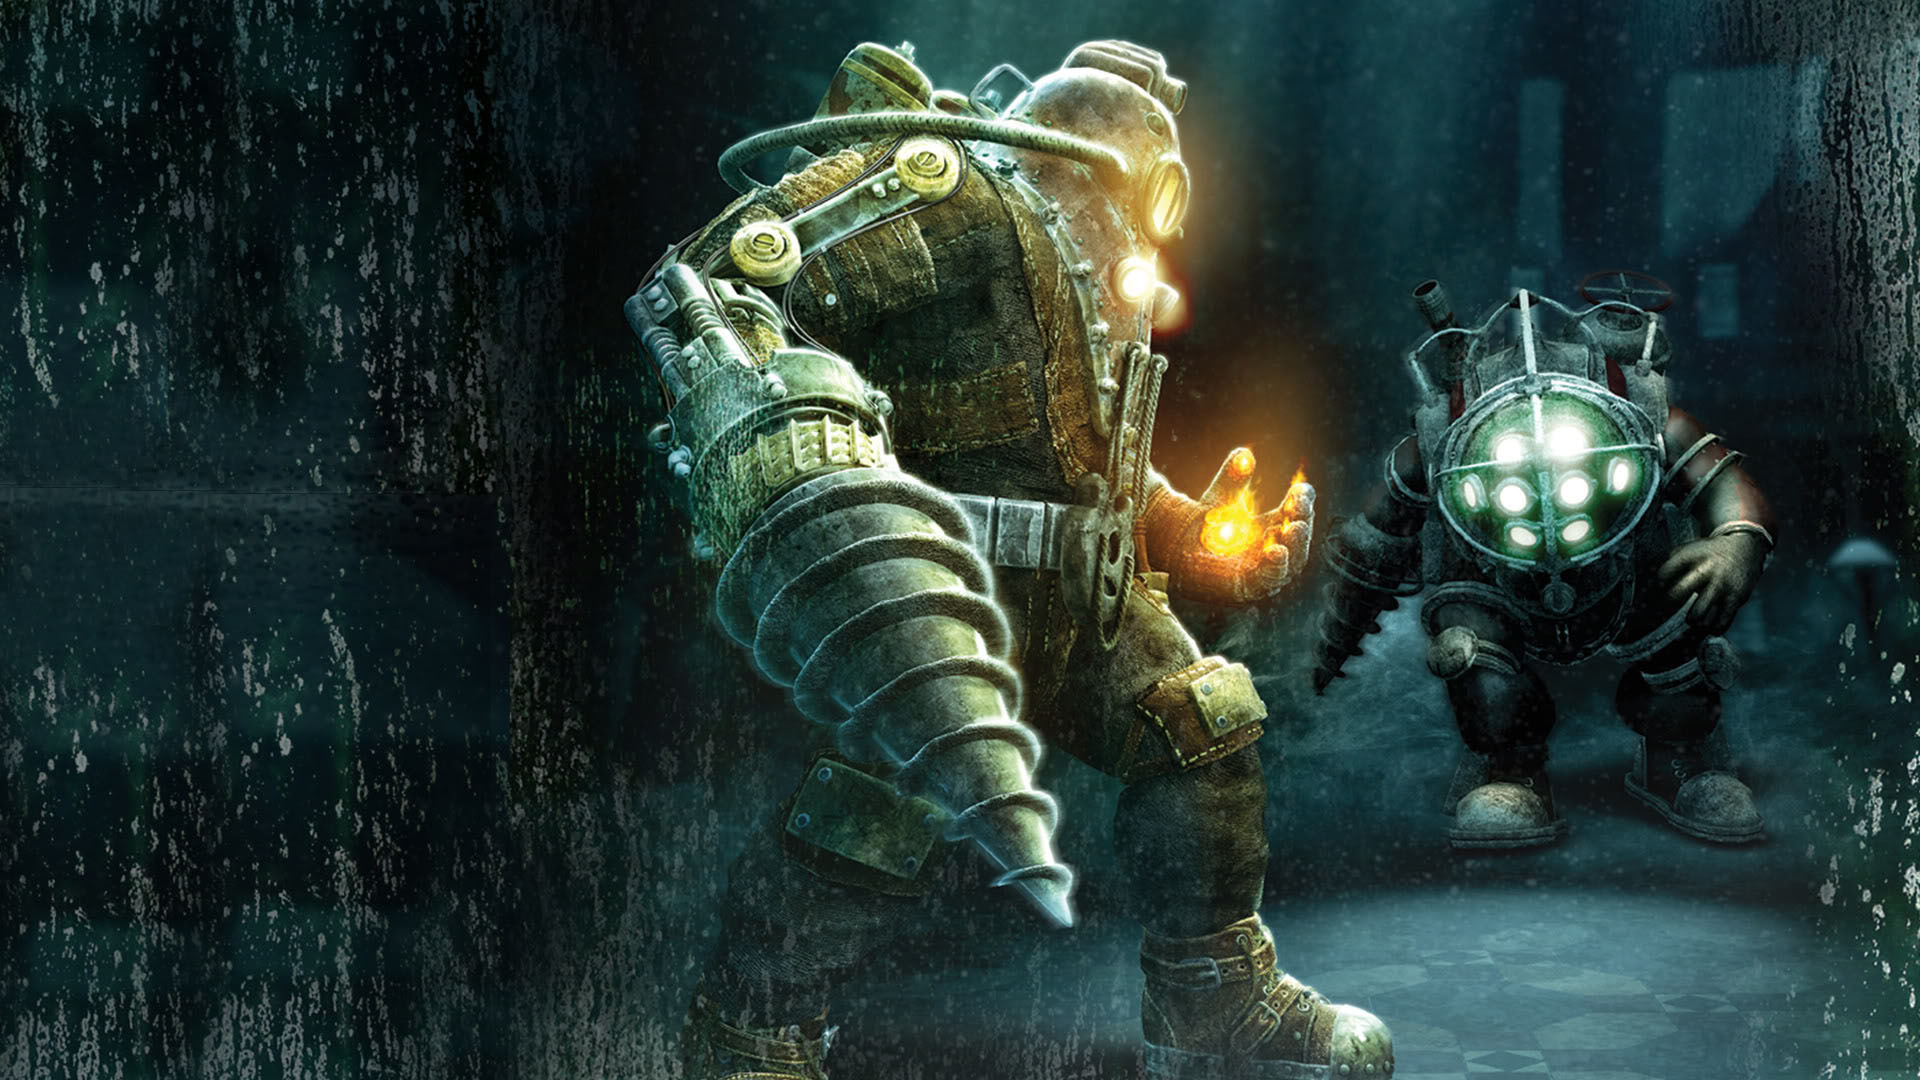 Big Daddy Vs Little Action Rpg Games Wallpaper Image Featuring